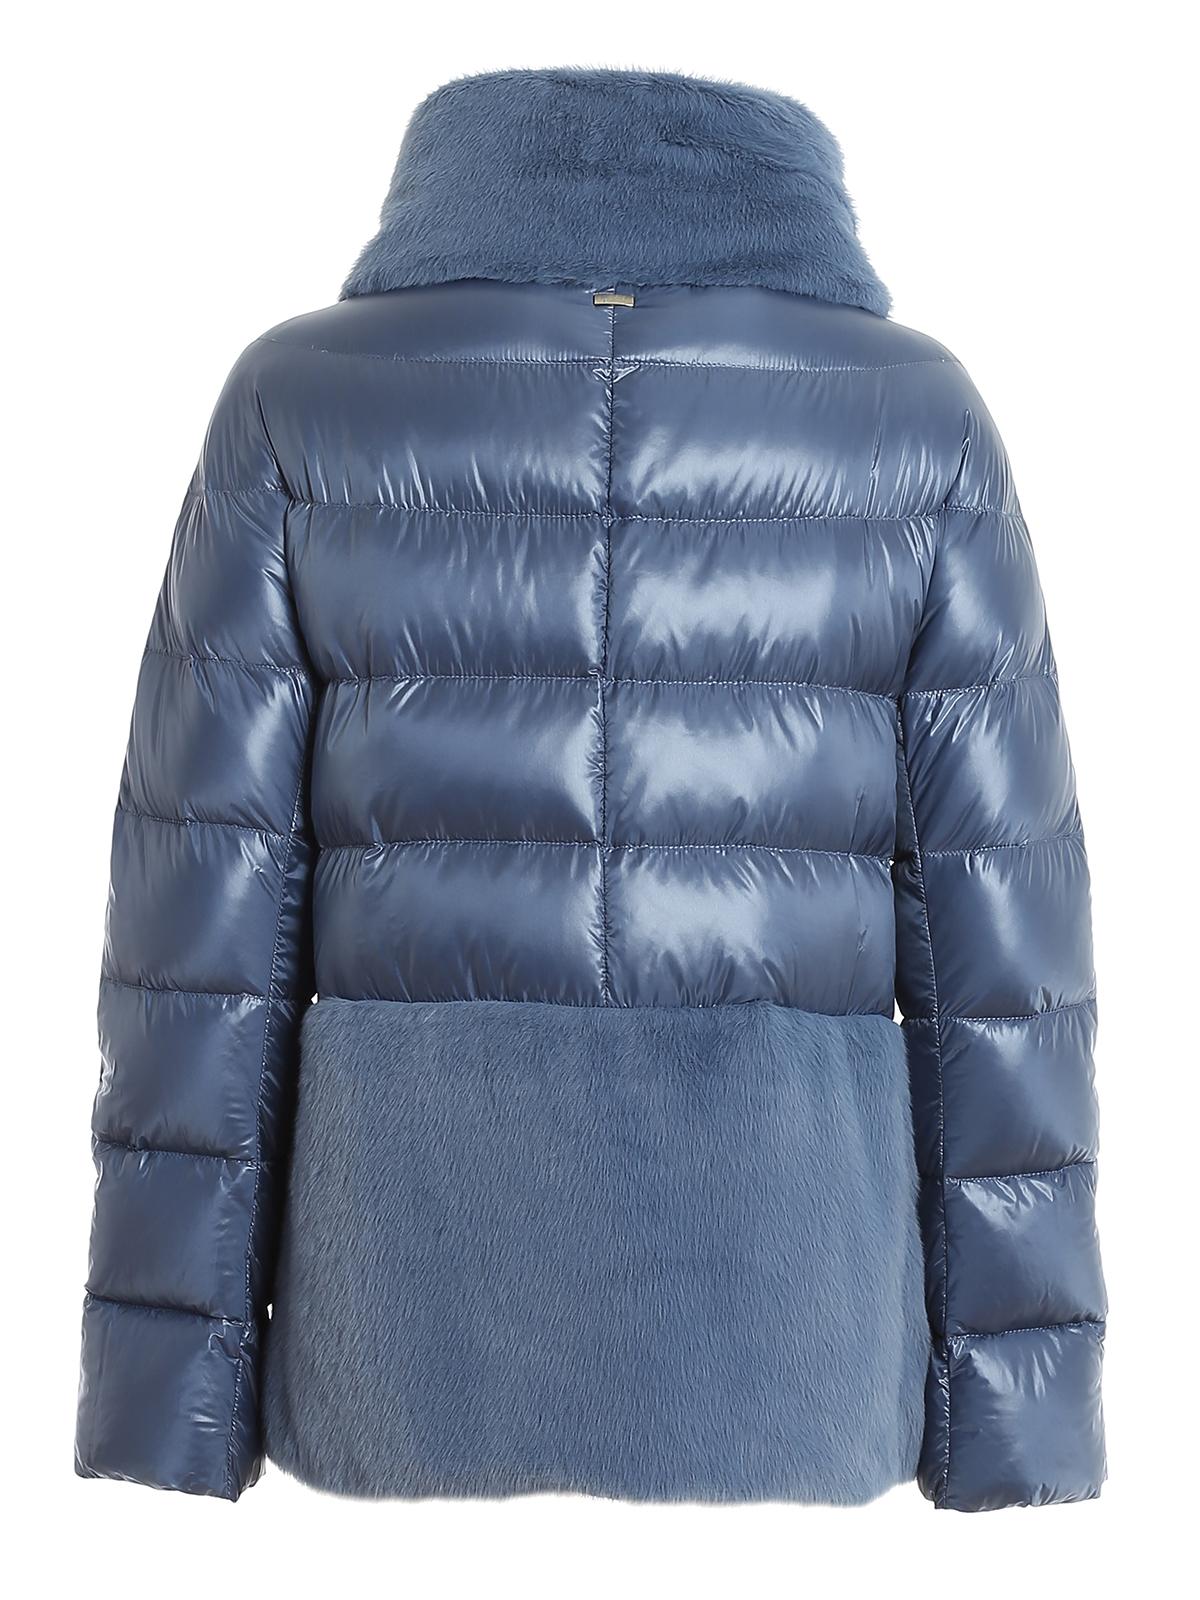 Herno Synthetic Faux Fur Detailed Puffer Jacket in Light Blue (Blue) - Lyst